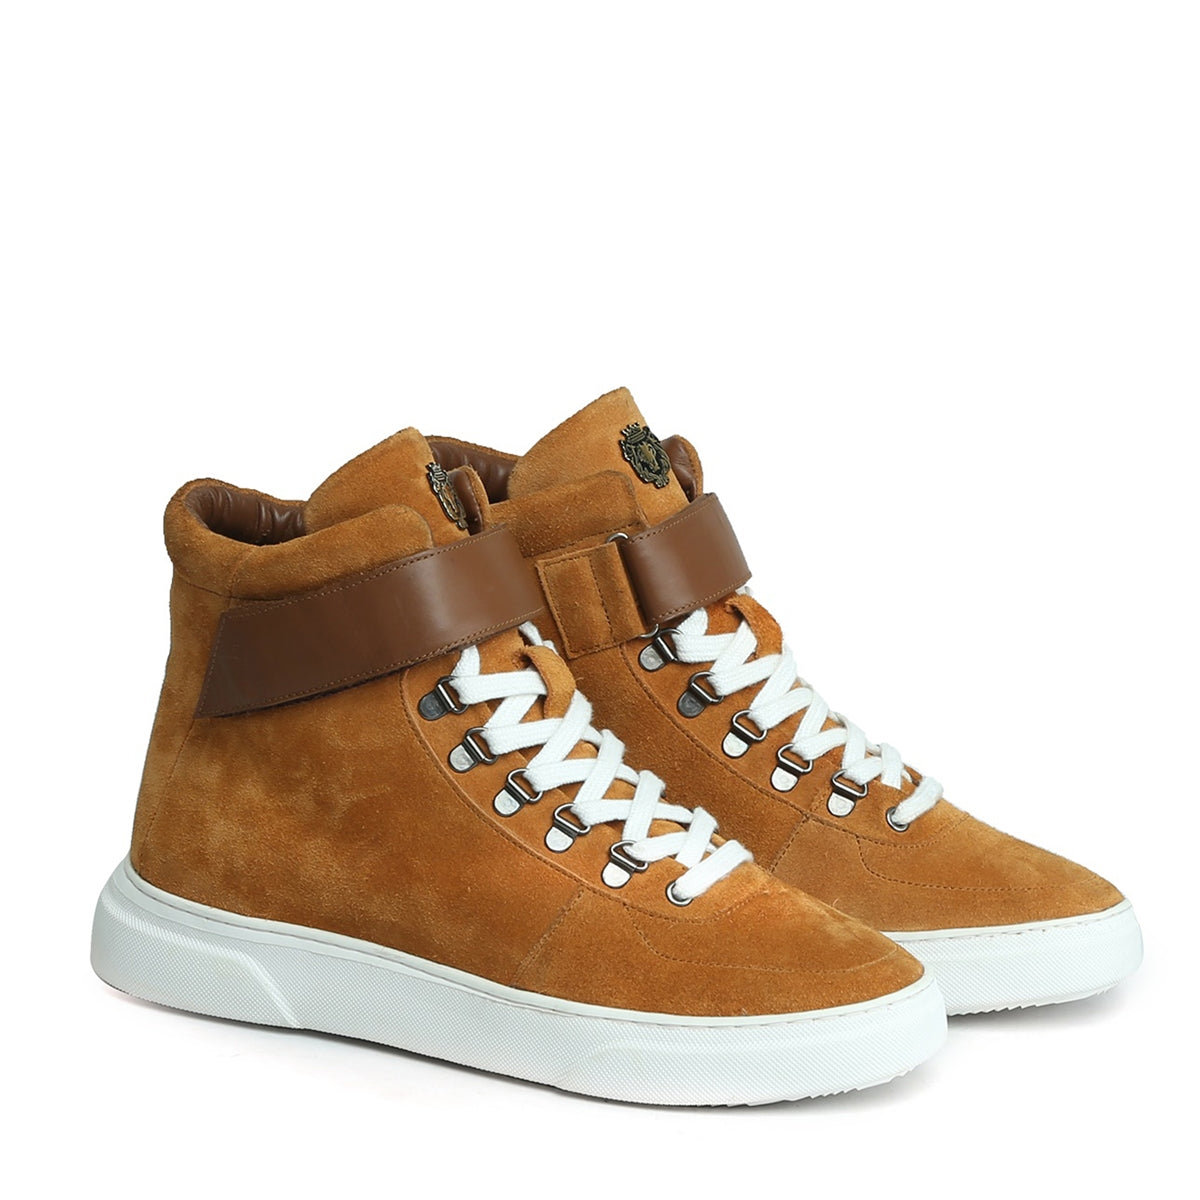 Astroloubi Mid - High-top sneakers - Calf leather, suede and neoprene -  Multicolor - Men - Christian Louboutin United States